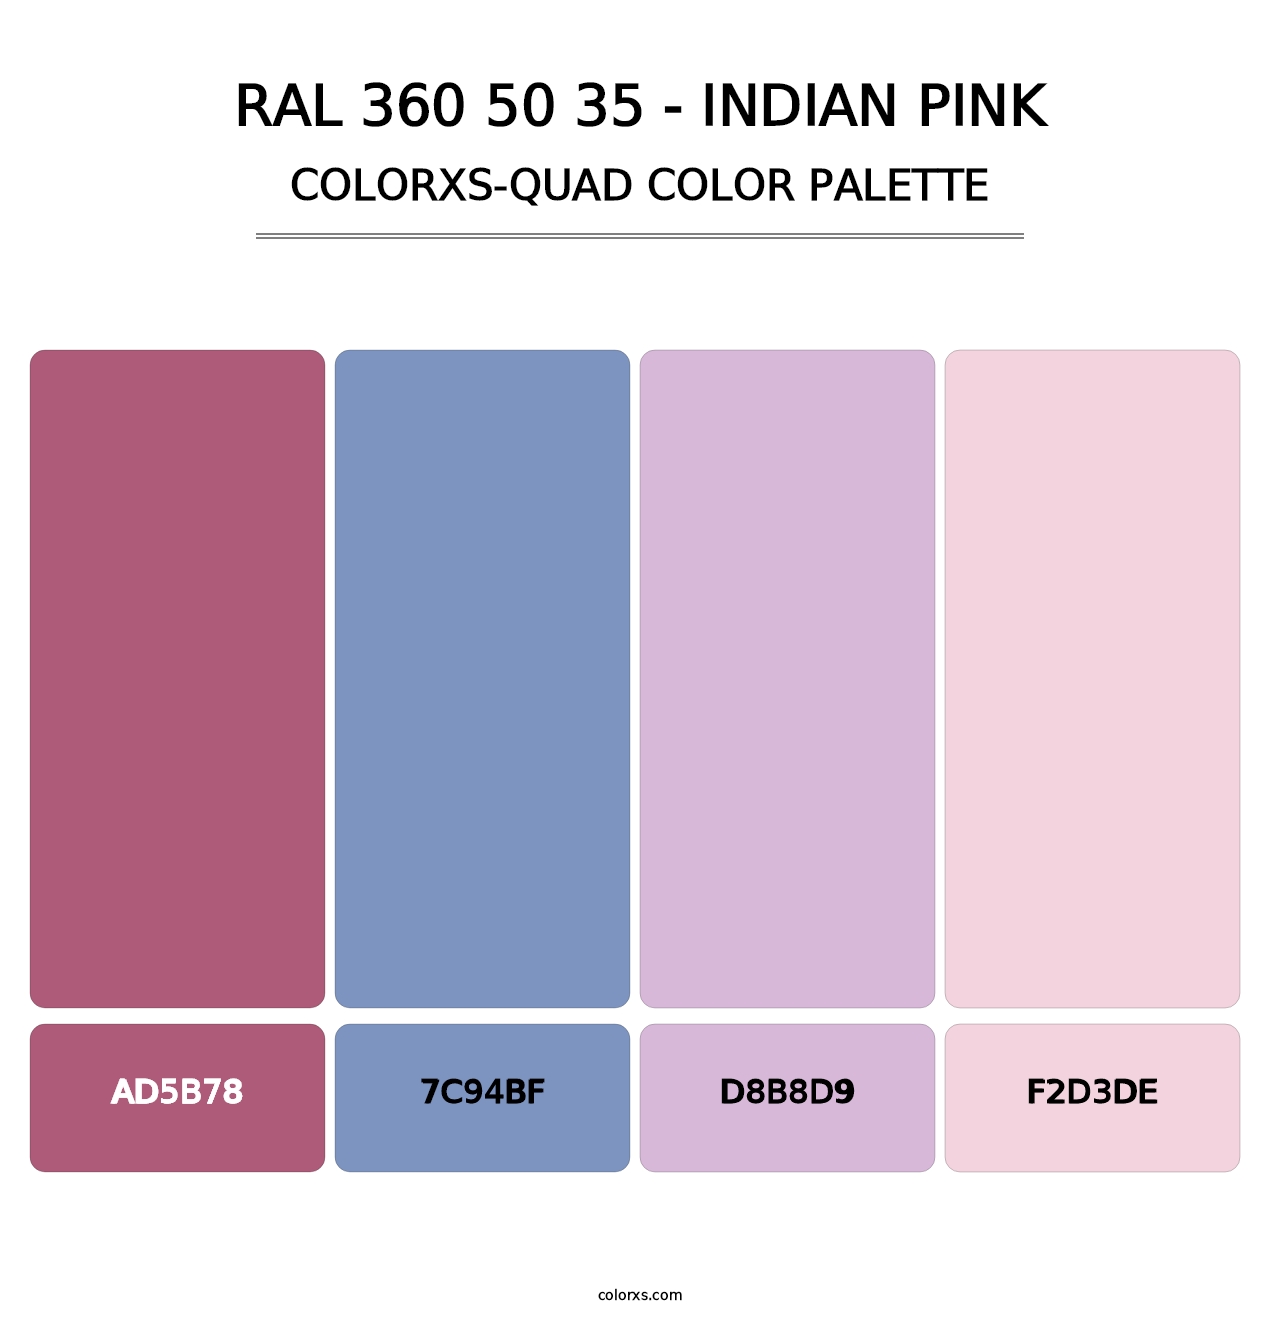 RAL 360 50 35 - Indian Pink - Colorxs Quad Palette